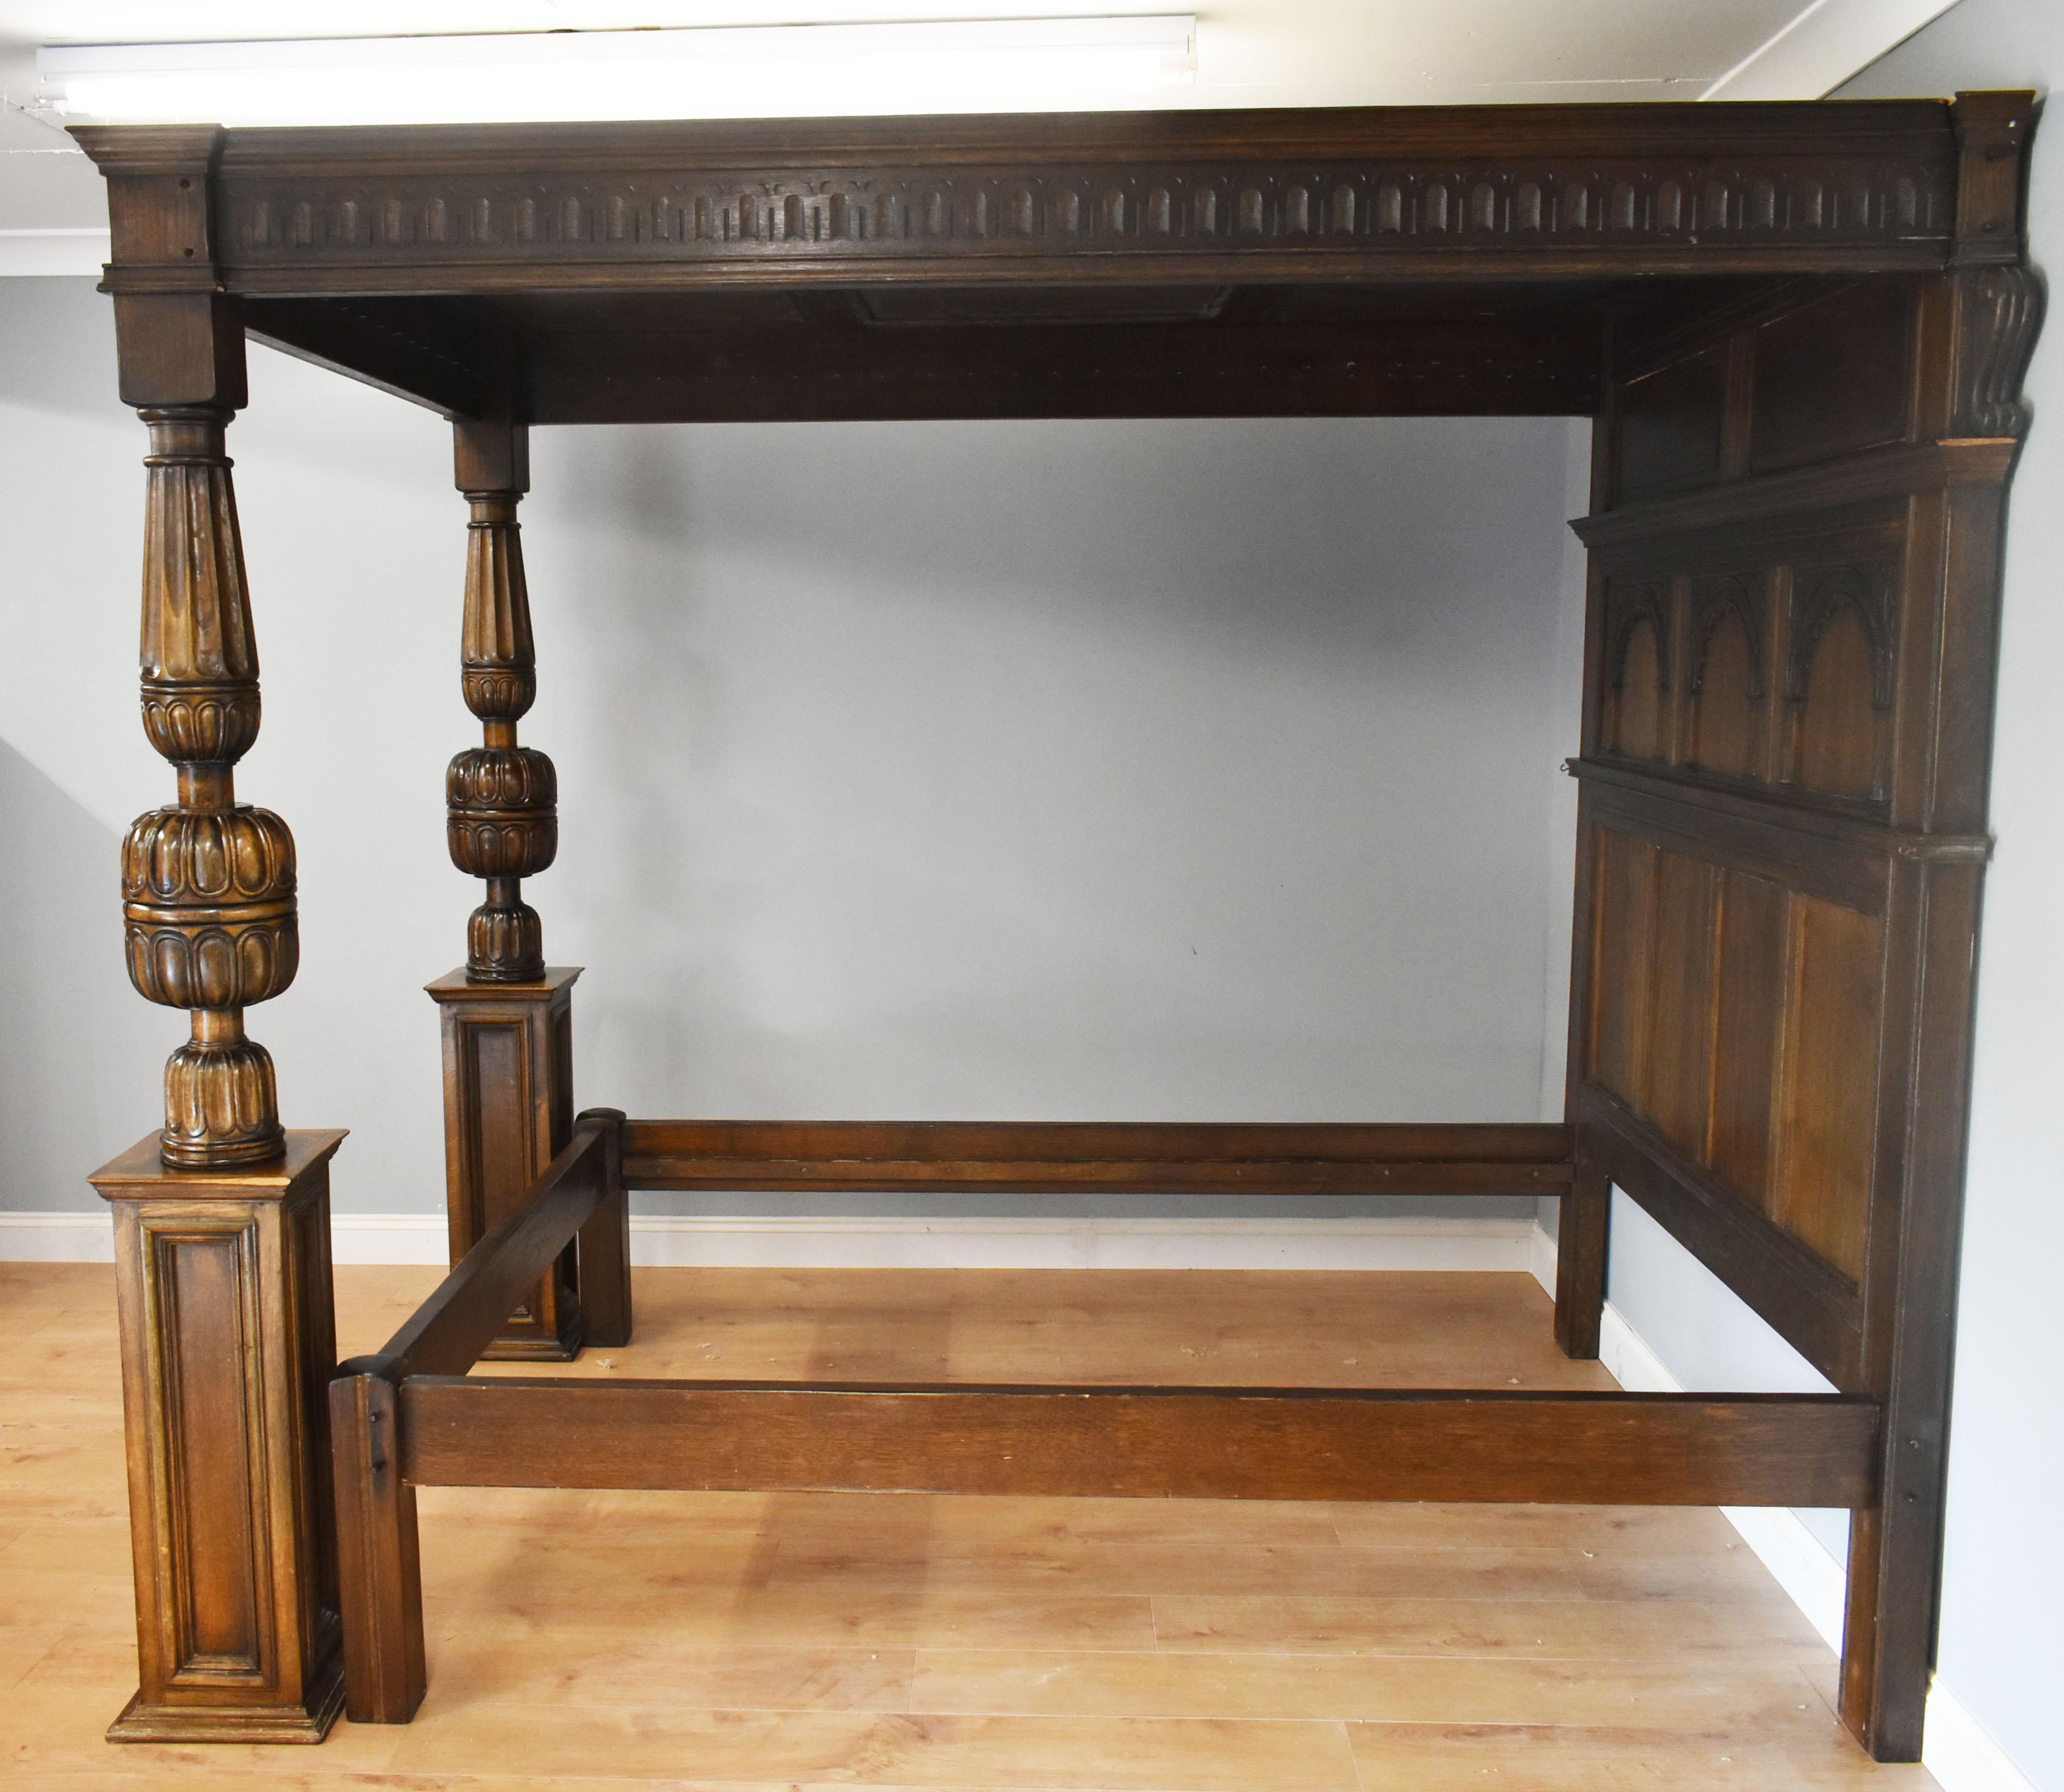 For sale is a superb quality Elizabethan style carved oak four-poster bed. The paneled canopy above a carved headboard with arched panels over plain square panels, joining the bed frame. The canopy is supported by two opposing gadrooned bulbous